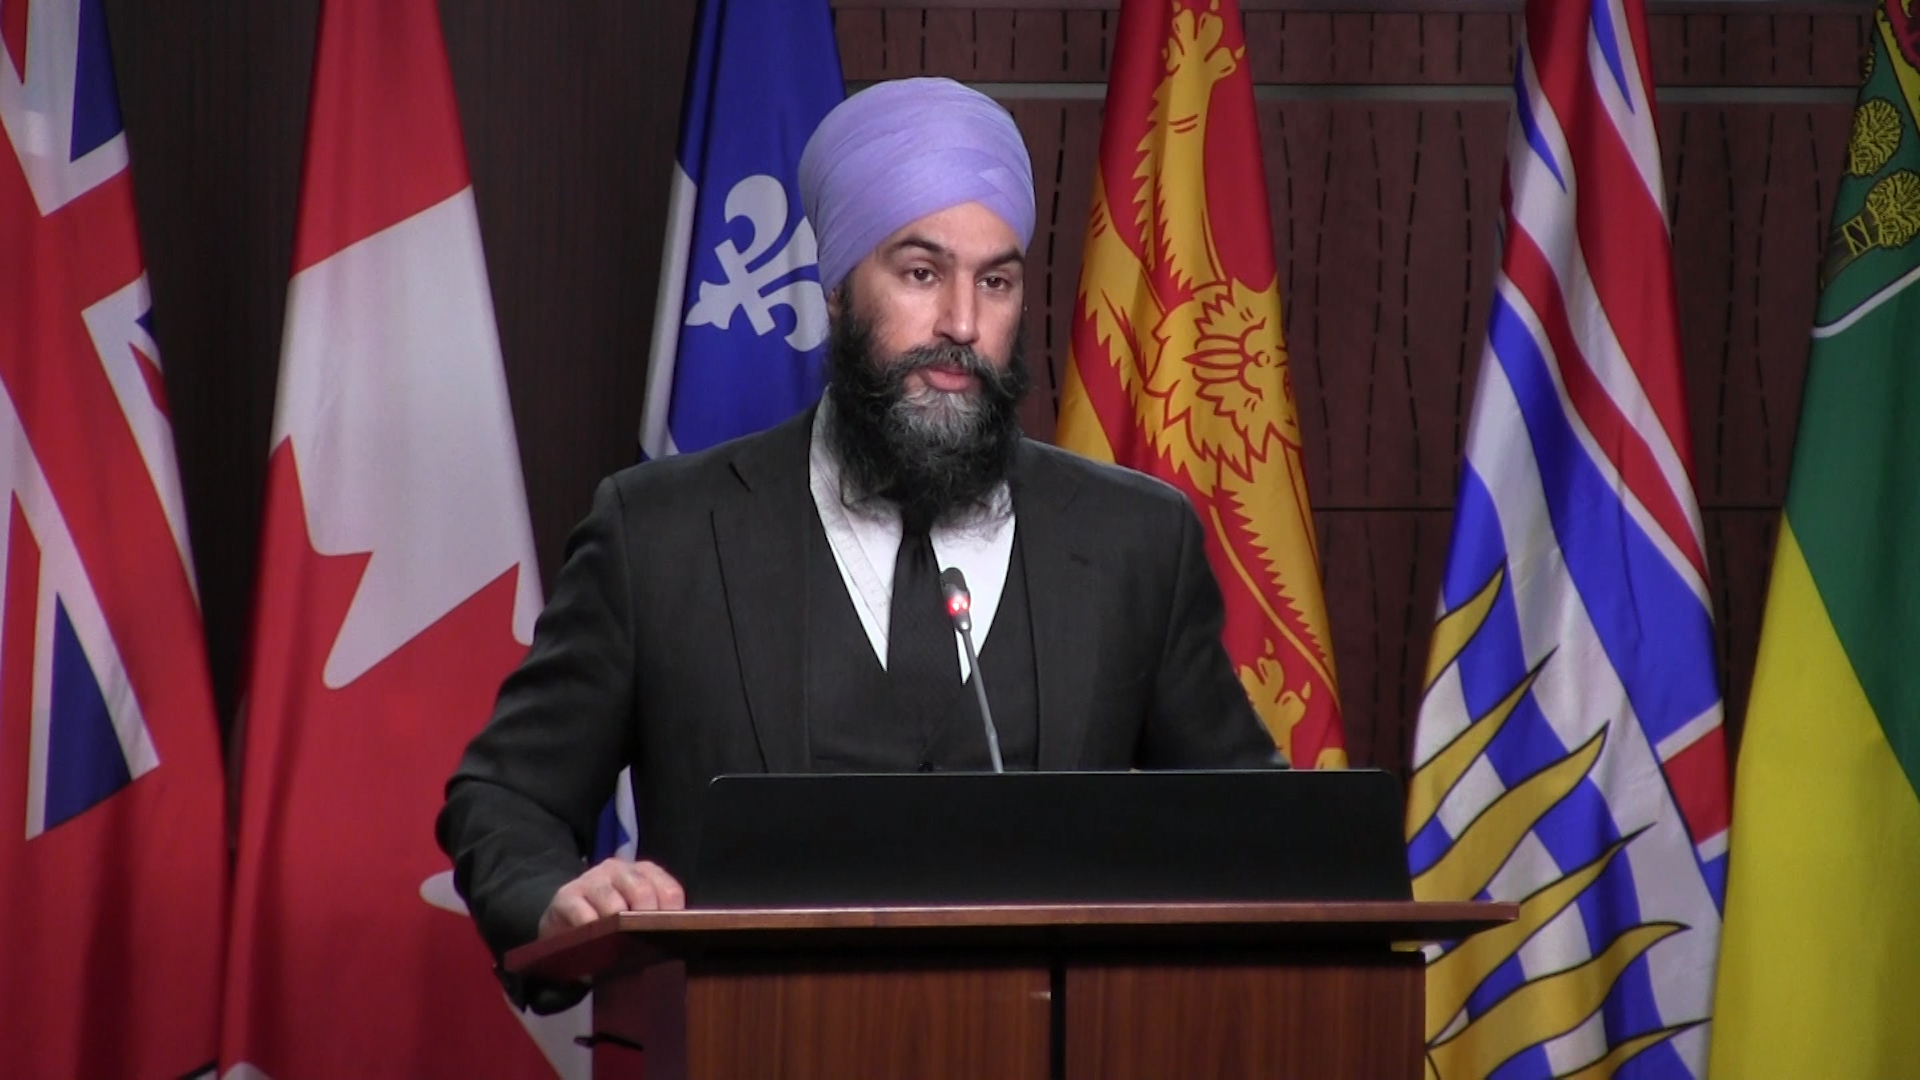 NDP ready for federal election after paying off debt: Singh